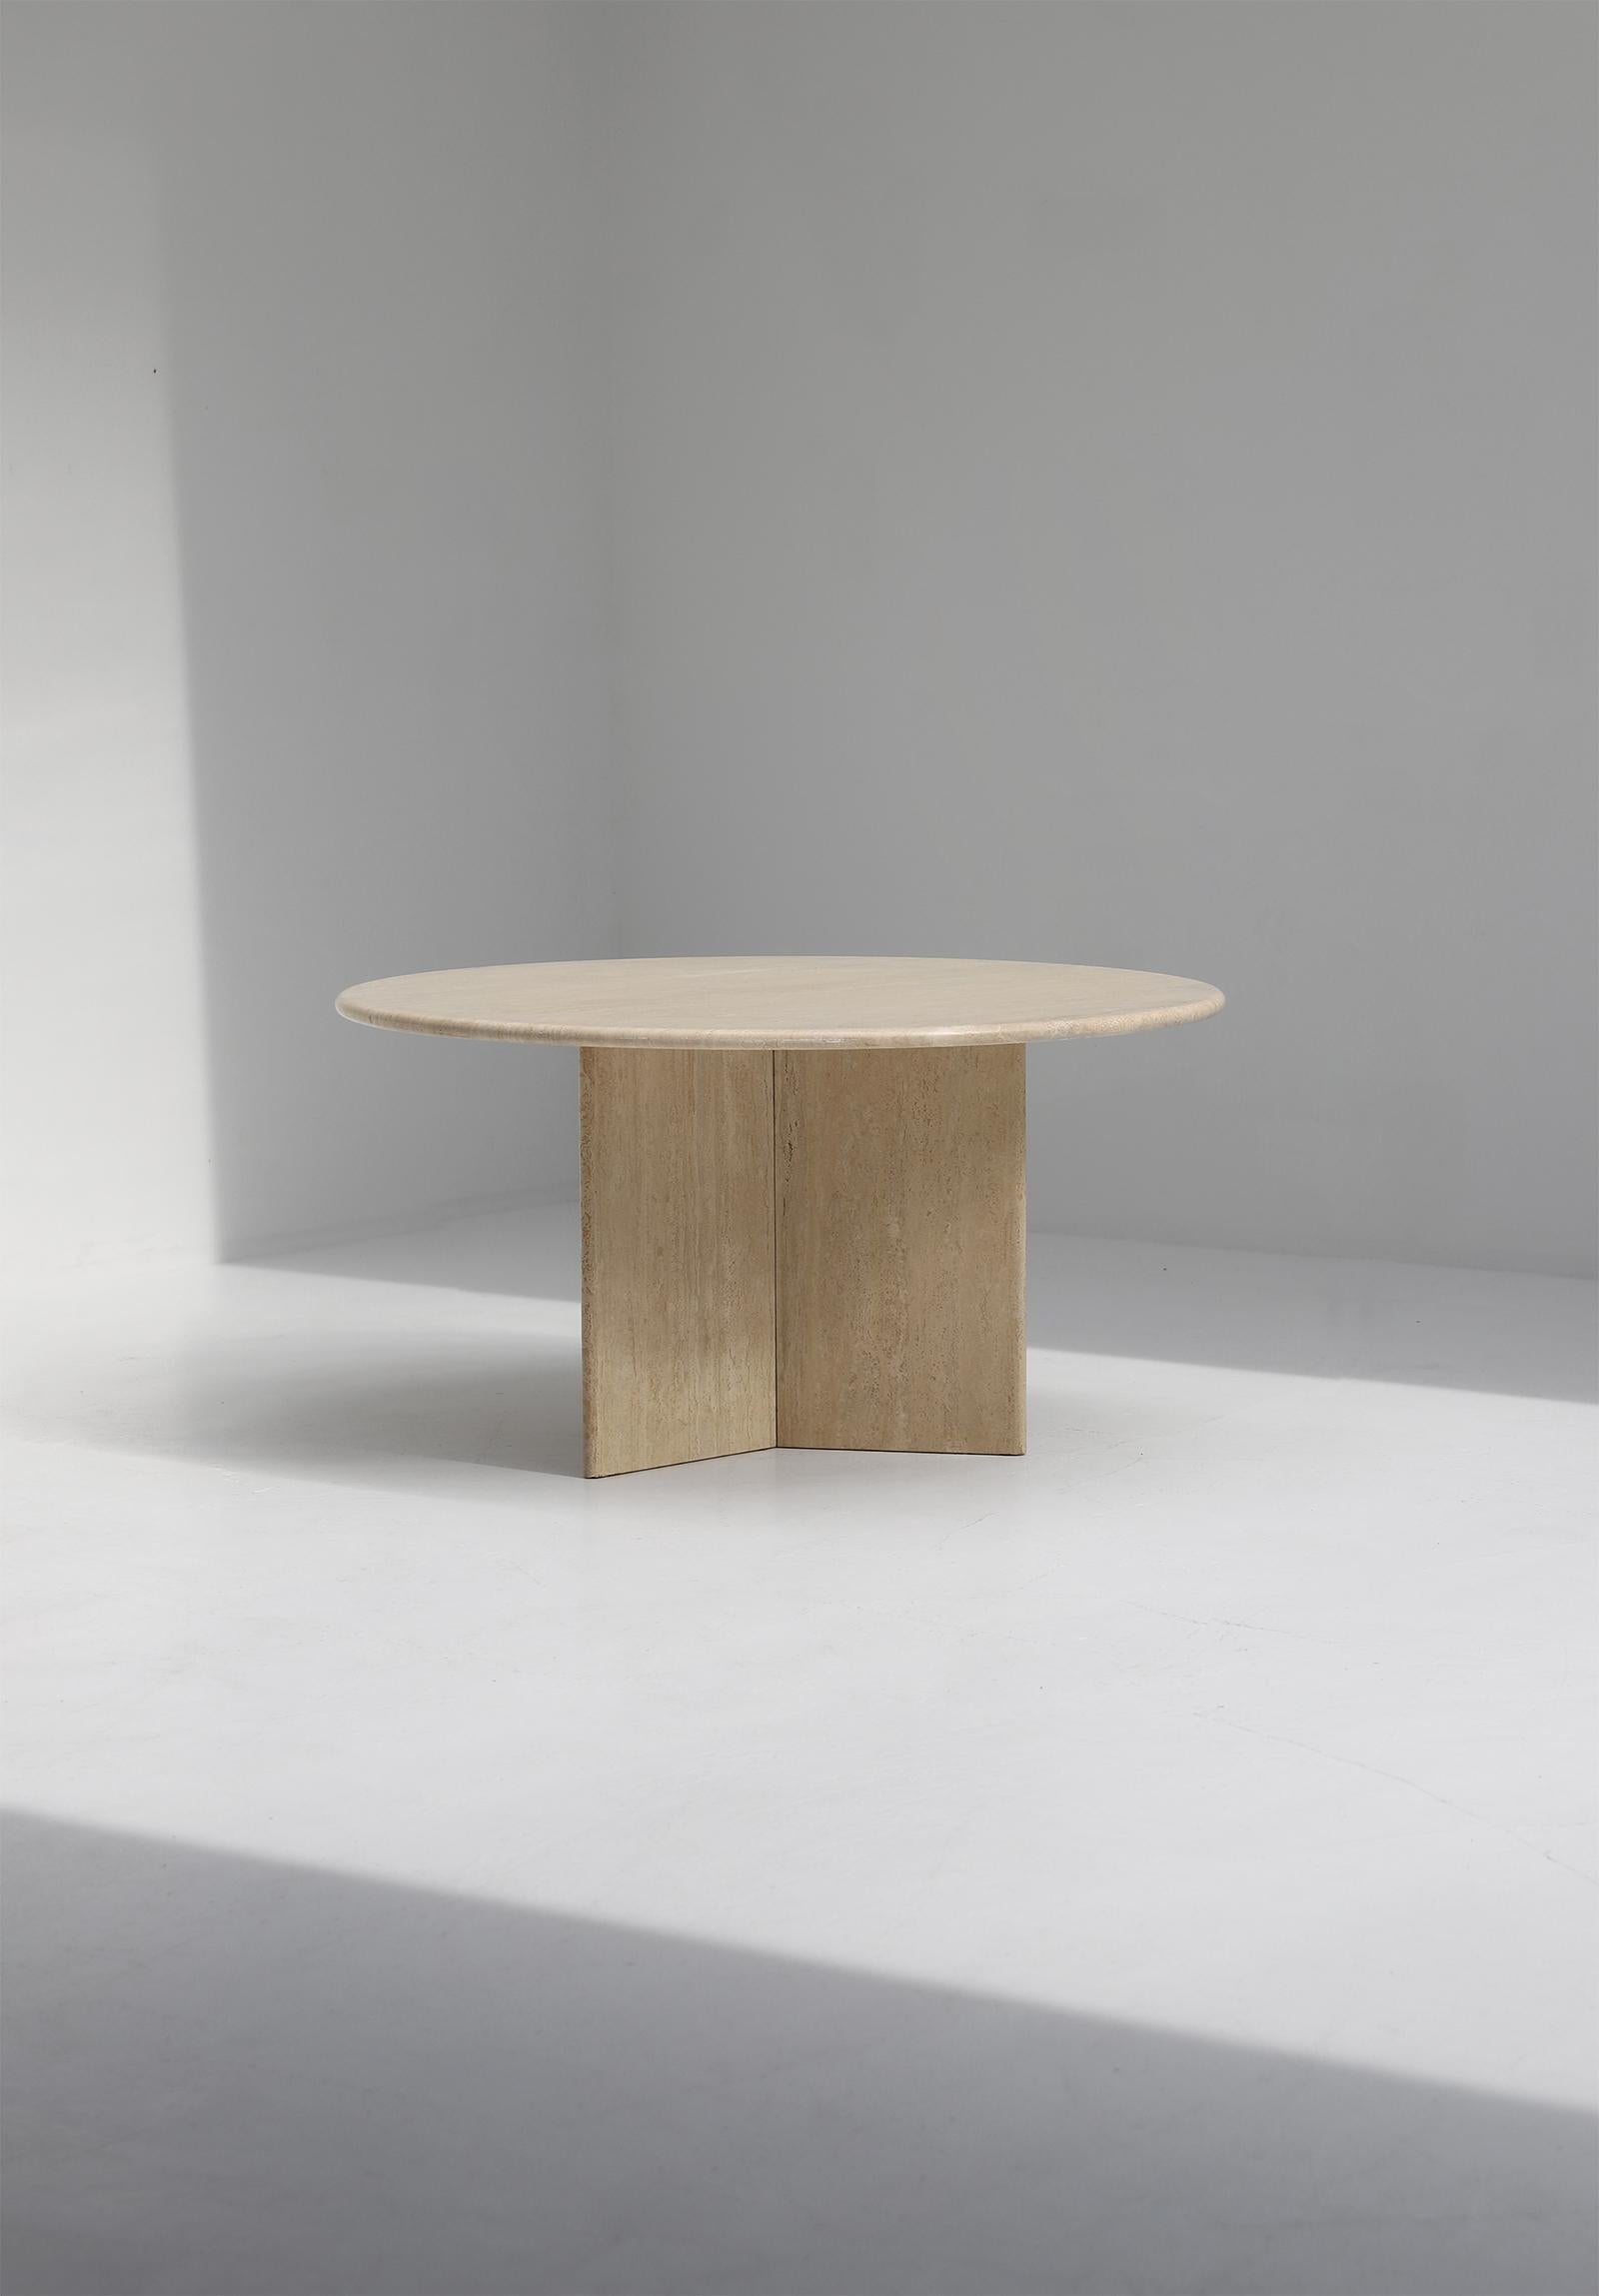 Decorative travertine dining table designed in the 1970s. The base is formed of three slabs of travertine, which combine into a triangle or star shape. The tabletop has a moon shaped pattern and makes it stand out. The table stands in a beautiful